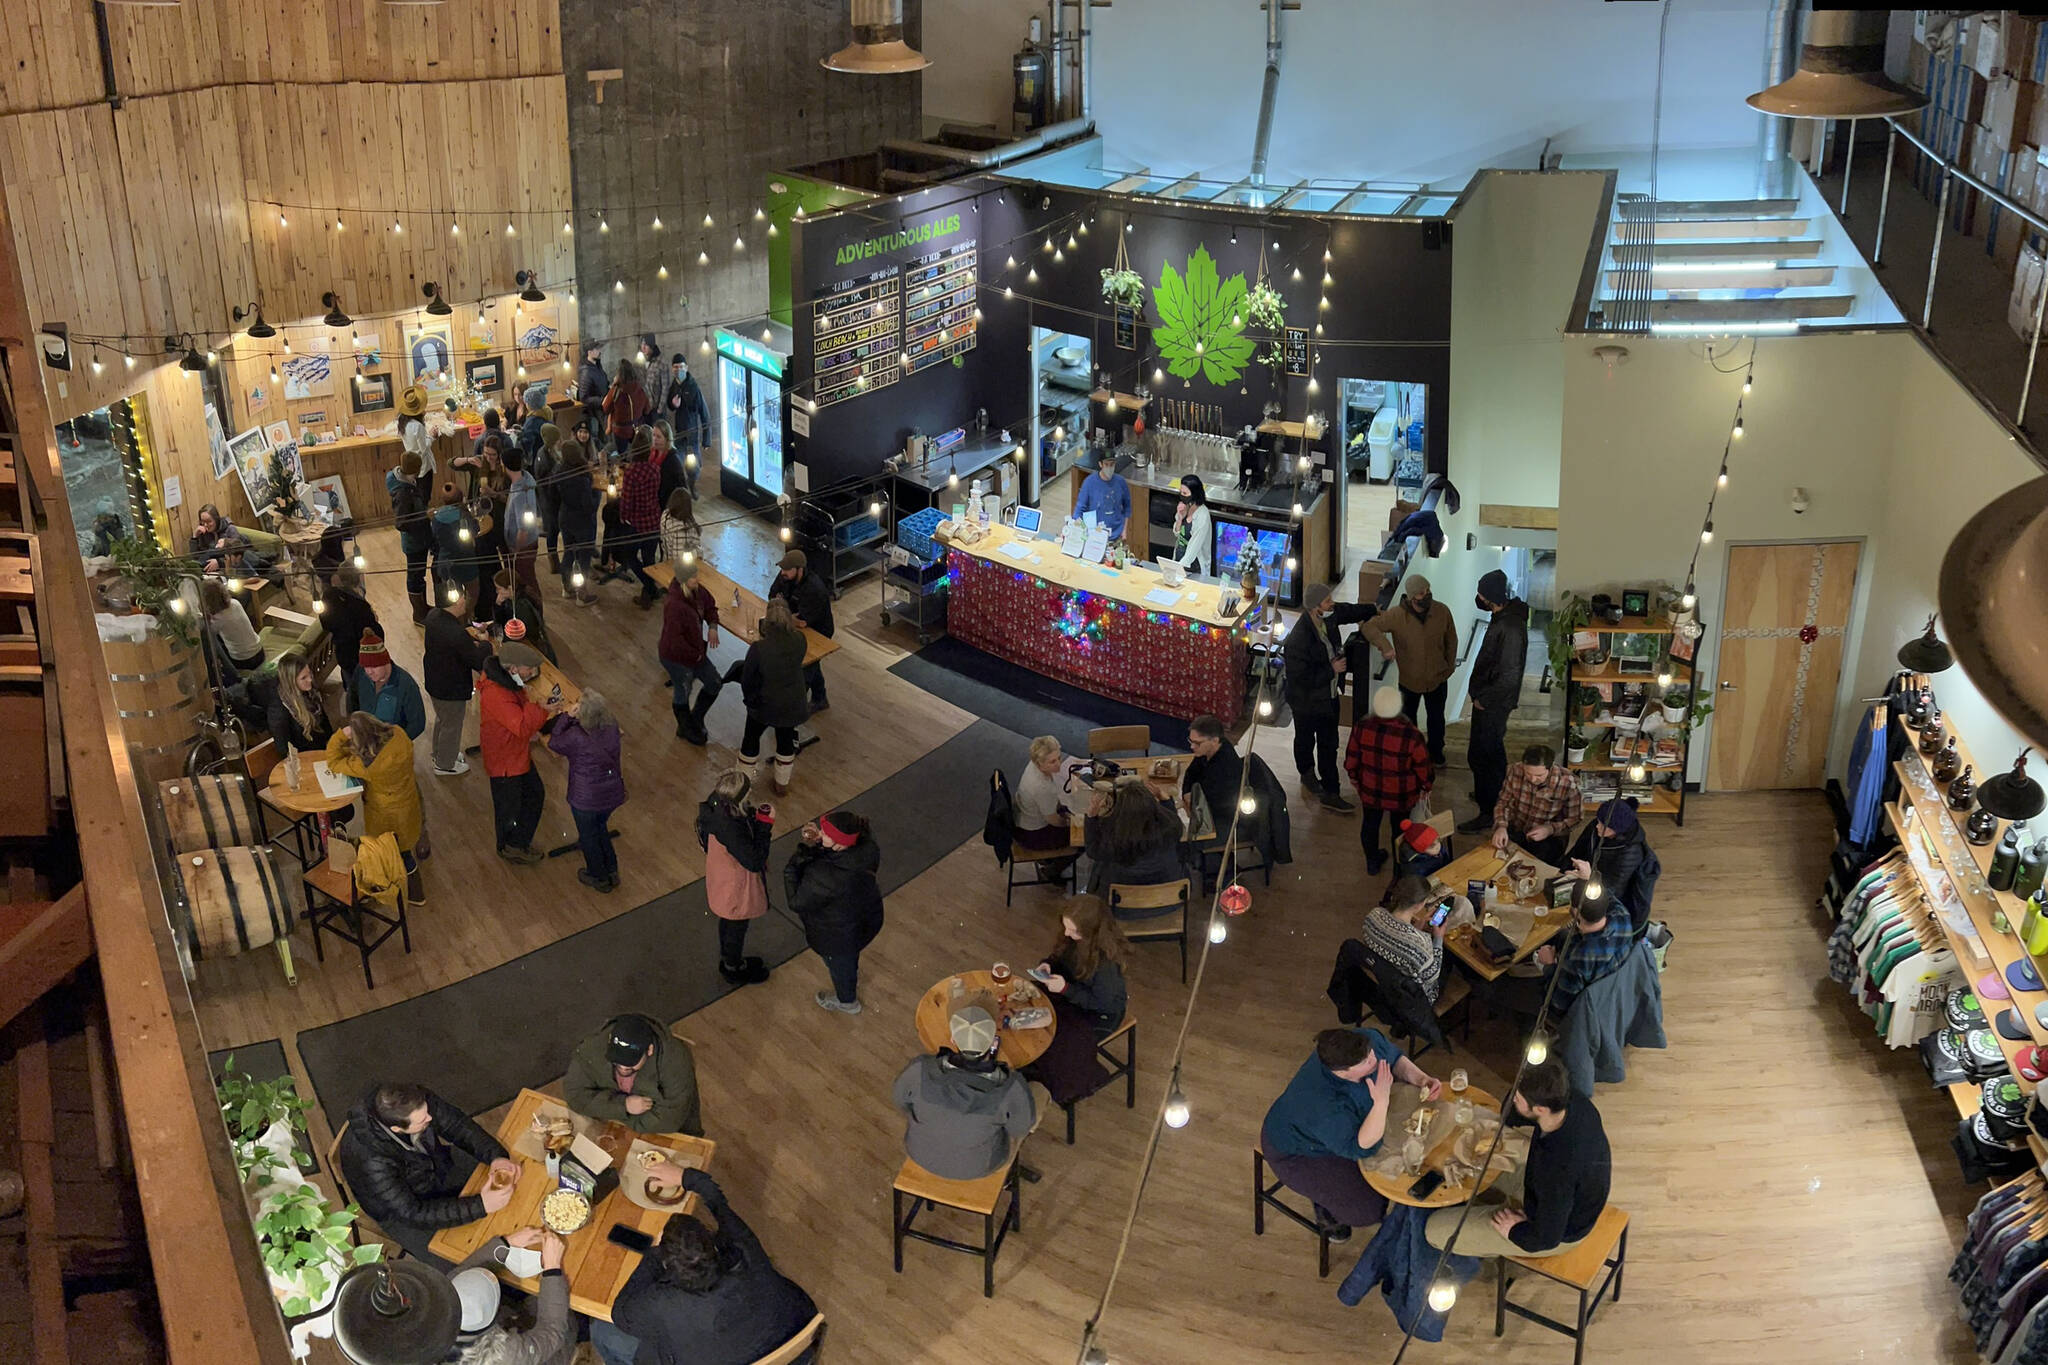 Juneau residents enjoy Gallery Walk at Devil’s Club Brewing Company, which hosted artist Jacqui Tingey. (Courtesy photo / Mircea Brown)